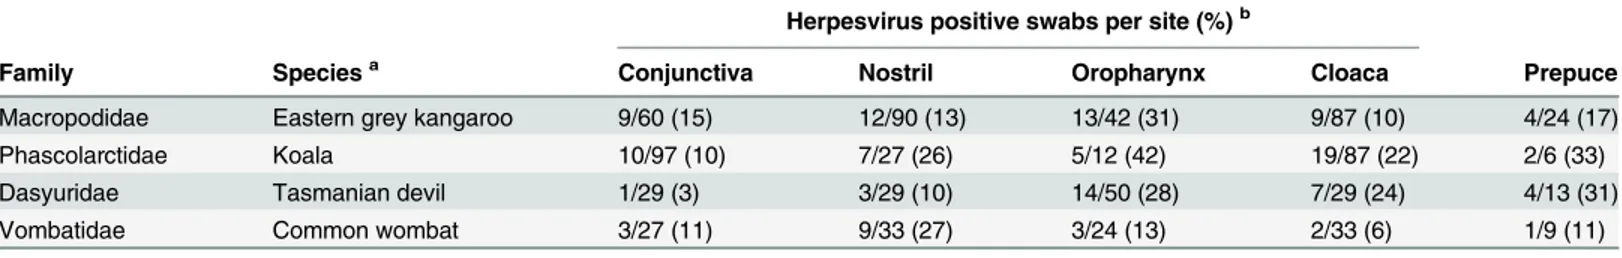 Table 2. Anatomical sites of herpesvirus DNA detection in swab samples collected from Australian marsupials in 2010 and 2011.